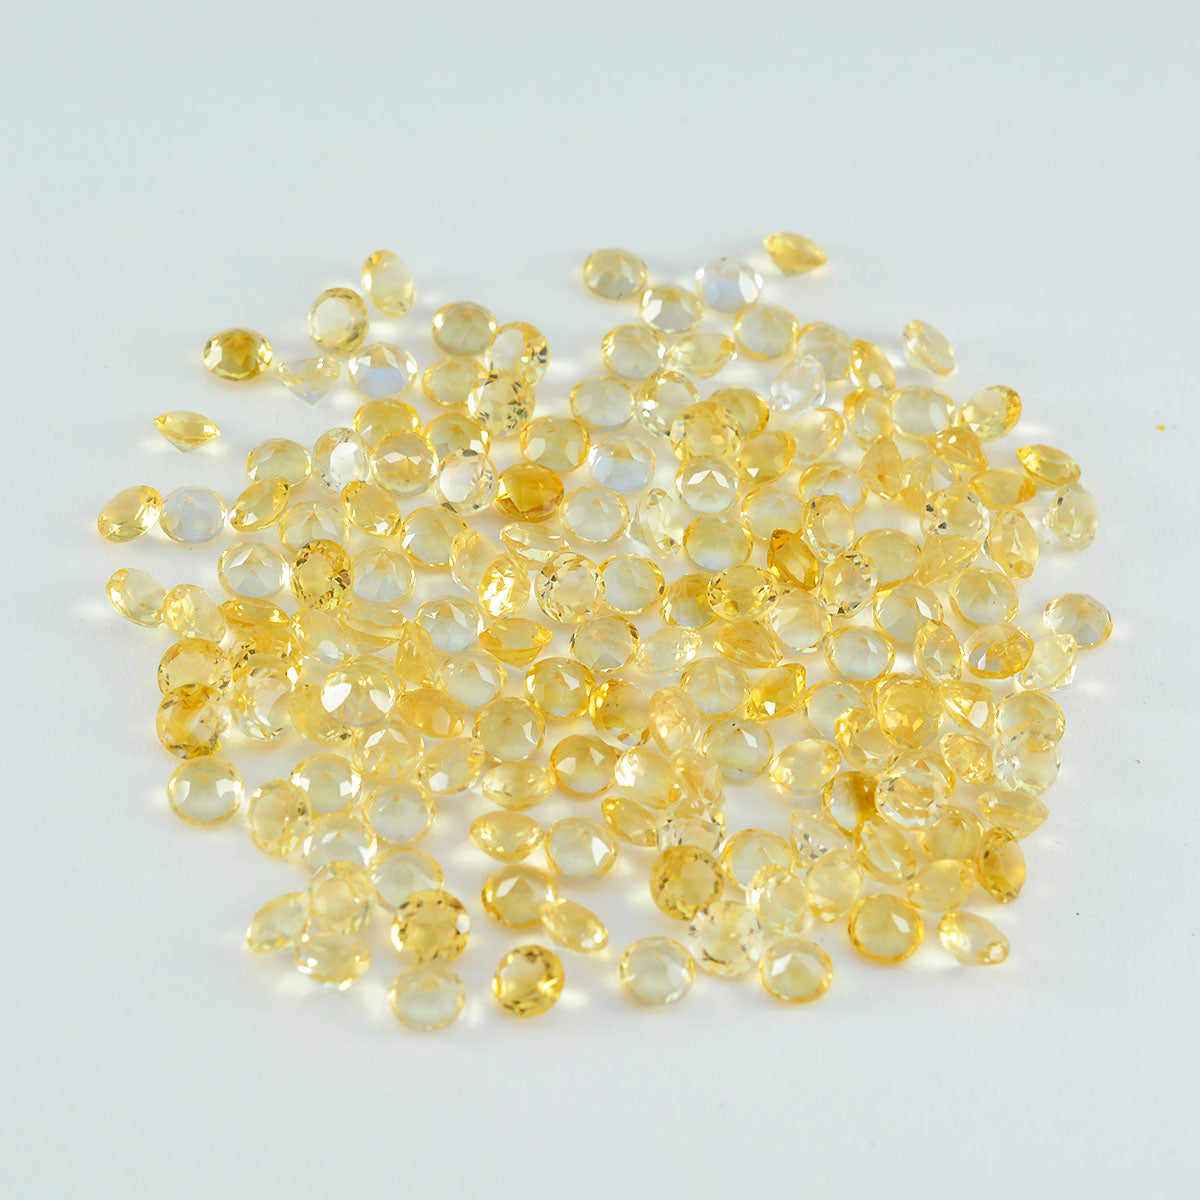 Riyogems 1PC Genuine Yellow Citrine Faceted 3x3 mm Round Shape awesome Quality Loose Stone